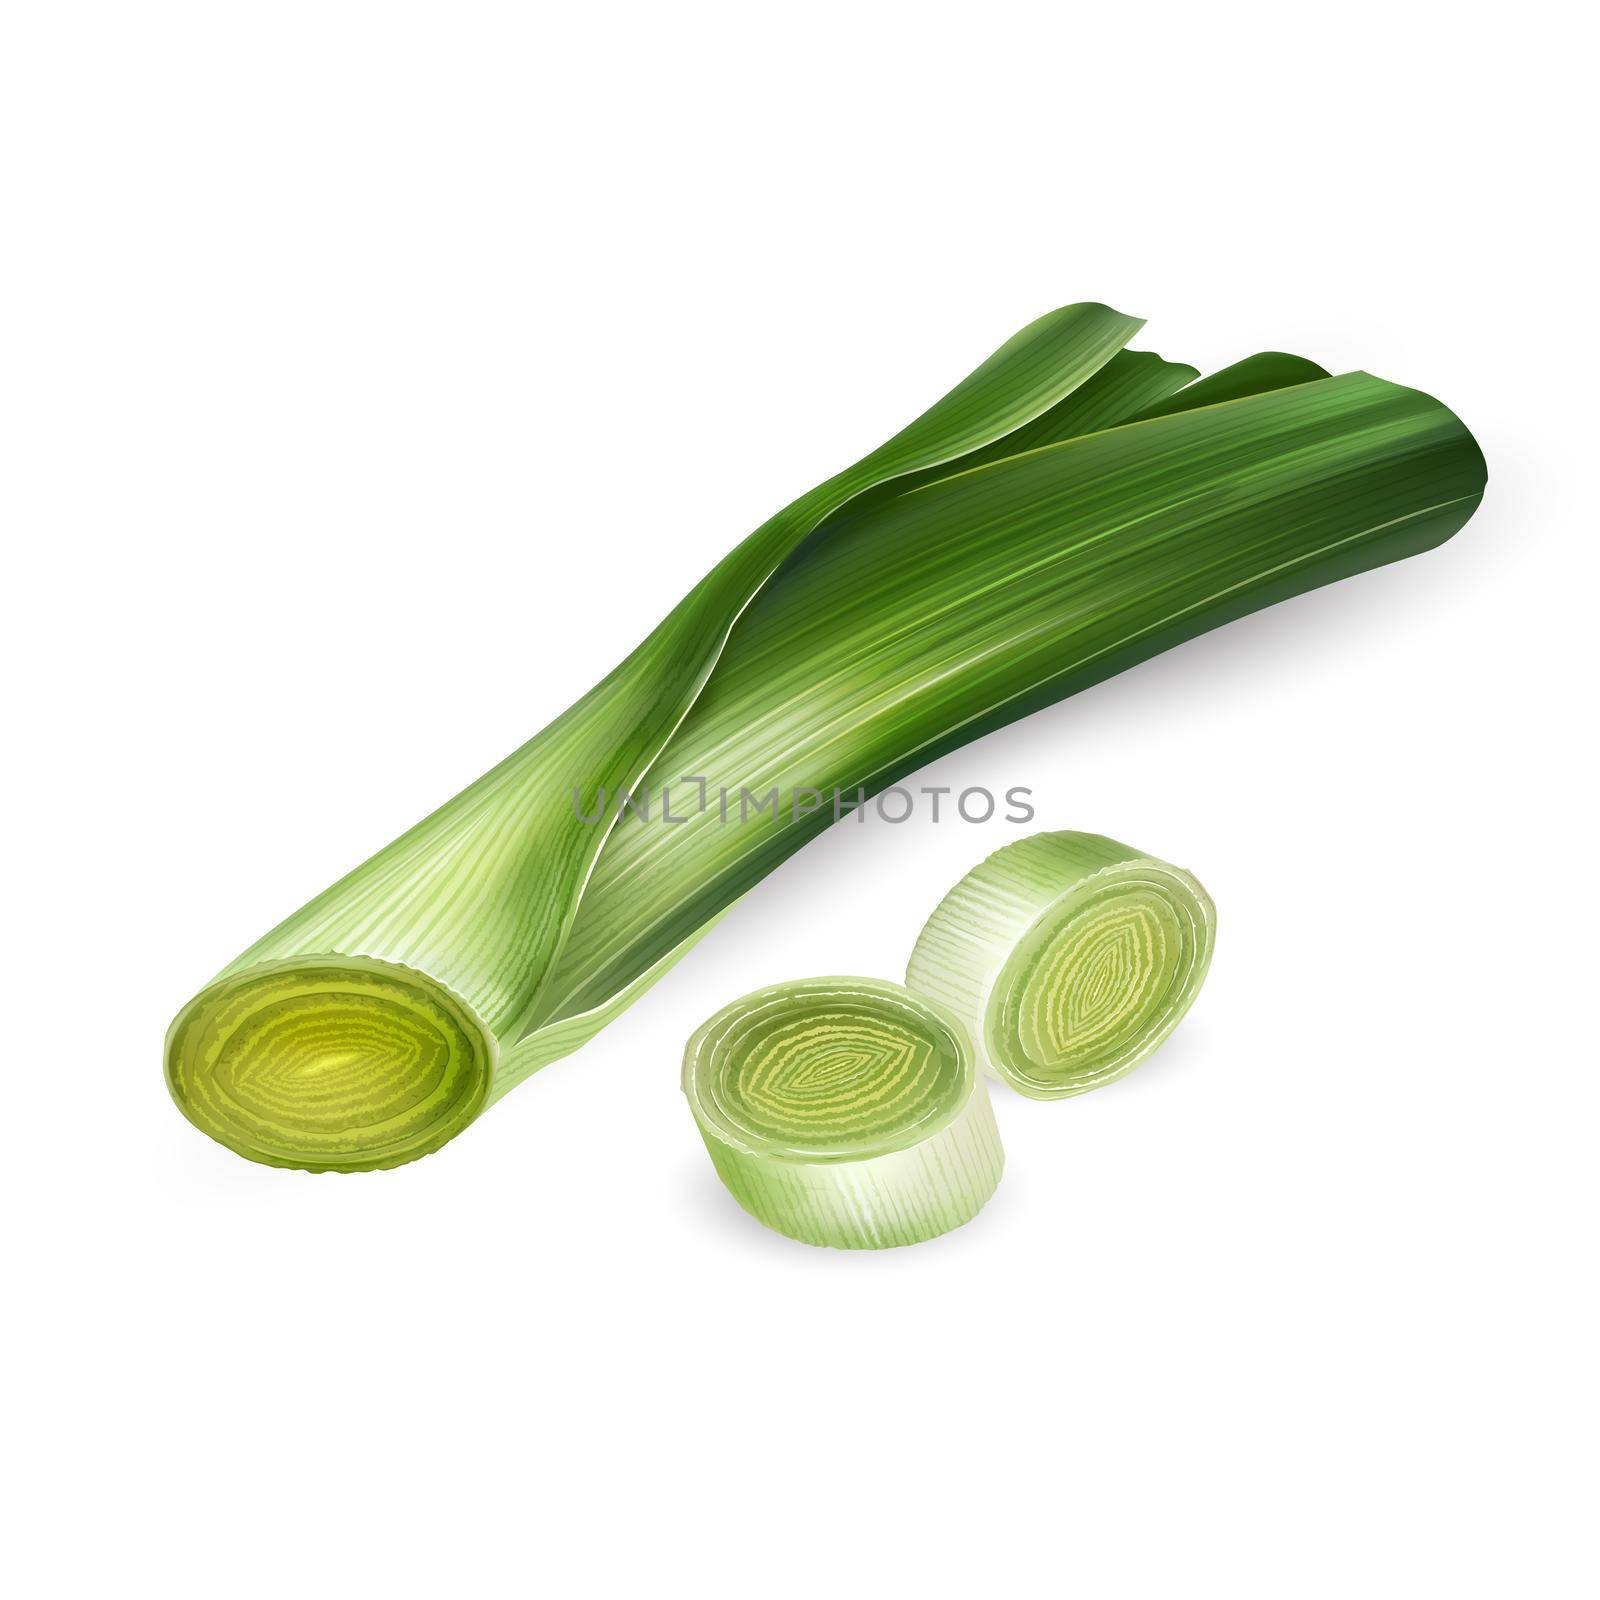 Fresh leek - green vegetables and healthy food design. Realistic style illustration.